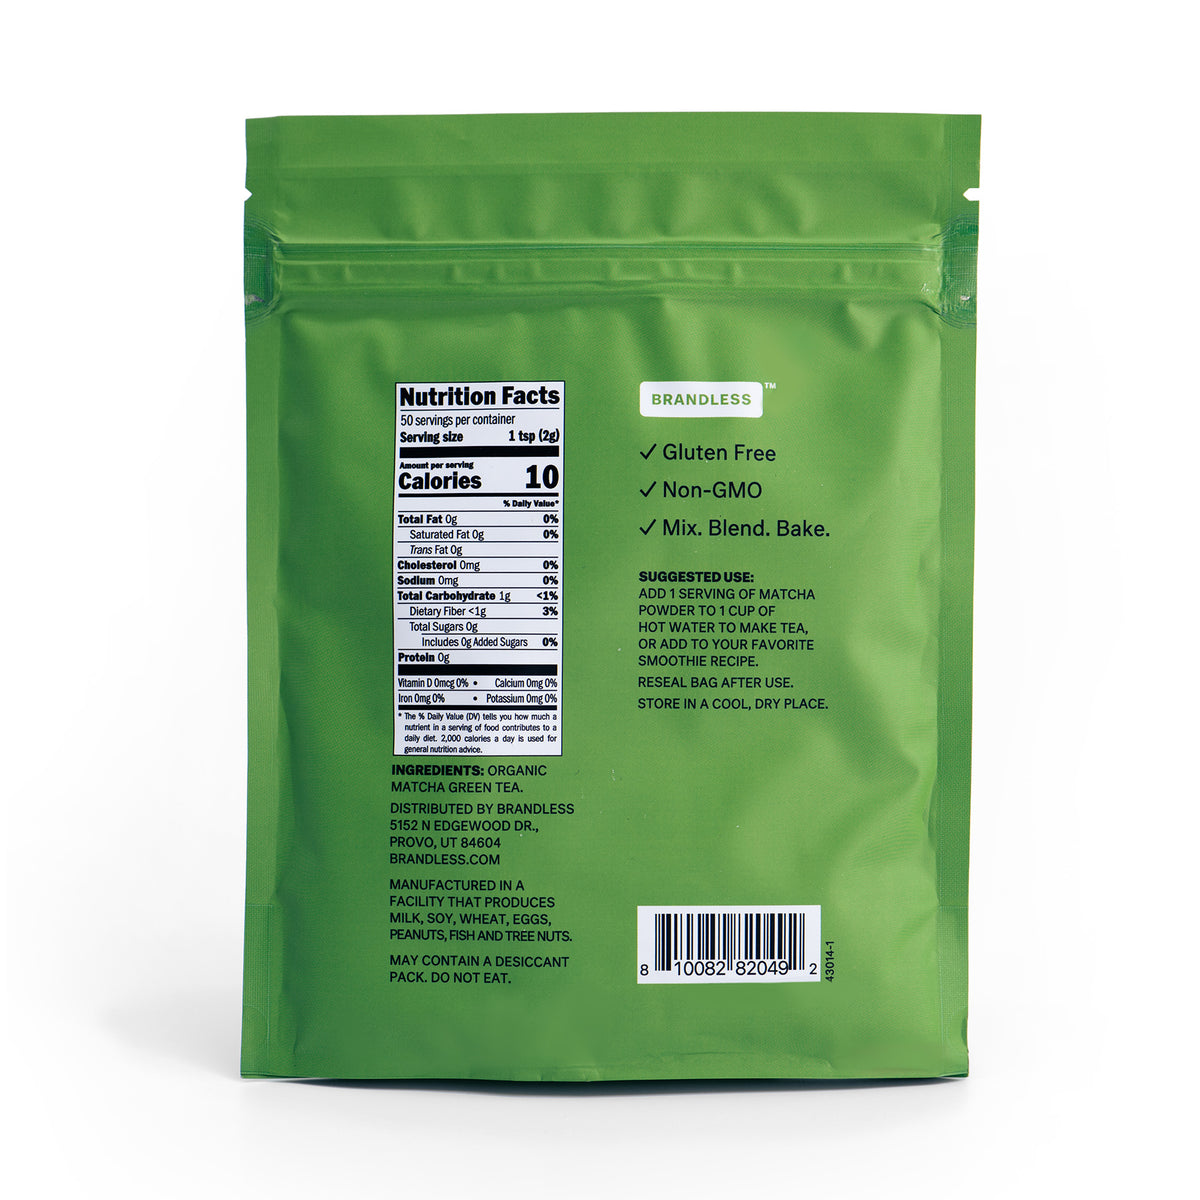 Rear of bag, nutrition facts, 10 calories, gluten free, non-gmo, mix. blend. shake. Ingredients: organic matcha green tea.  Manufactured in a facility that produces milk, soy, wheat, eggs, peanuts, fish and tree nuts. may contain a desiccant pack. do not eat.